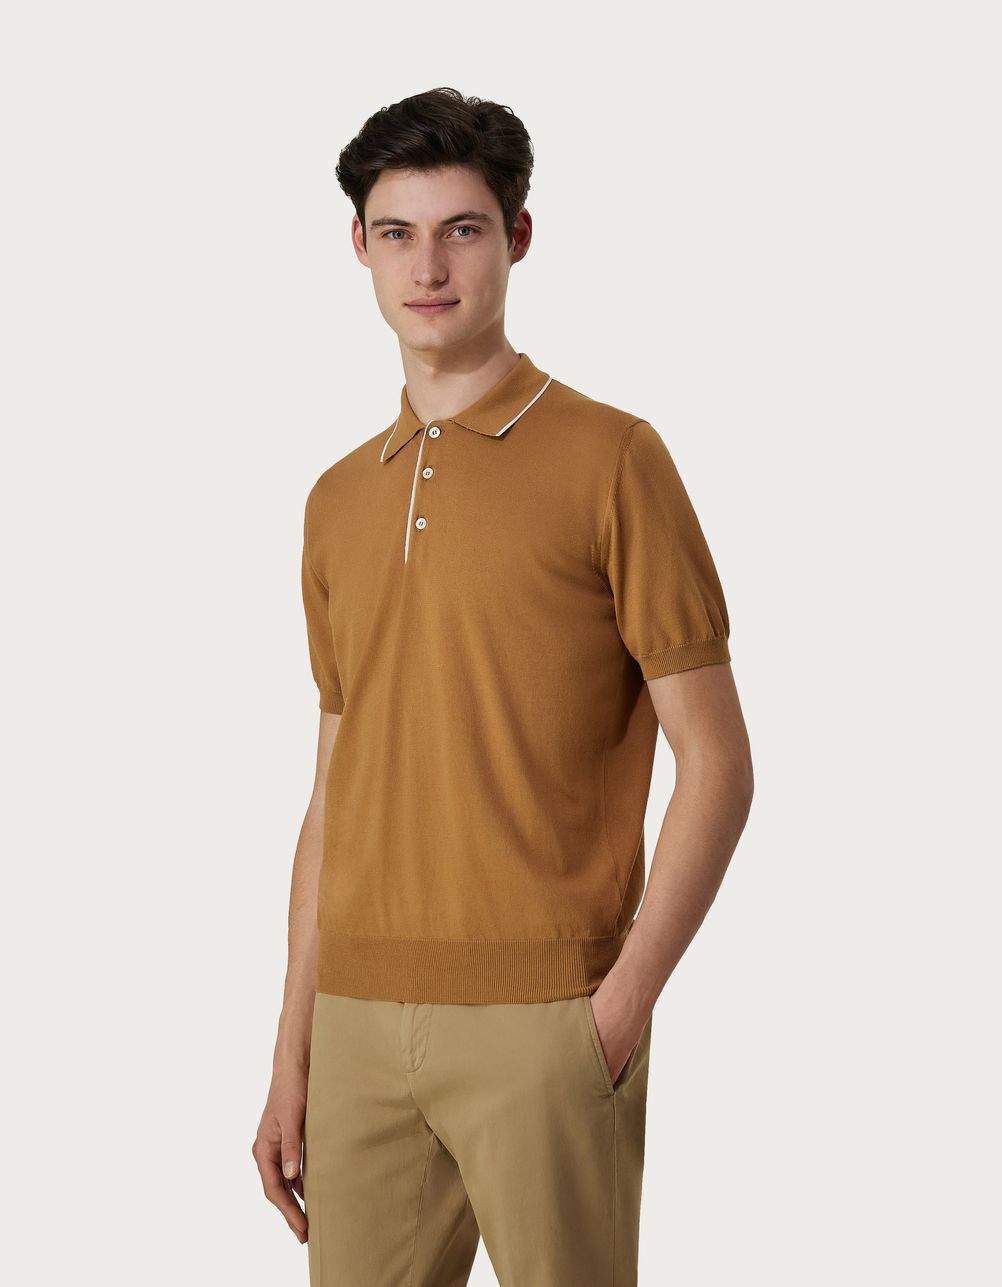 Cinnamon and white garment-dyed polo shirt in shaved cotton